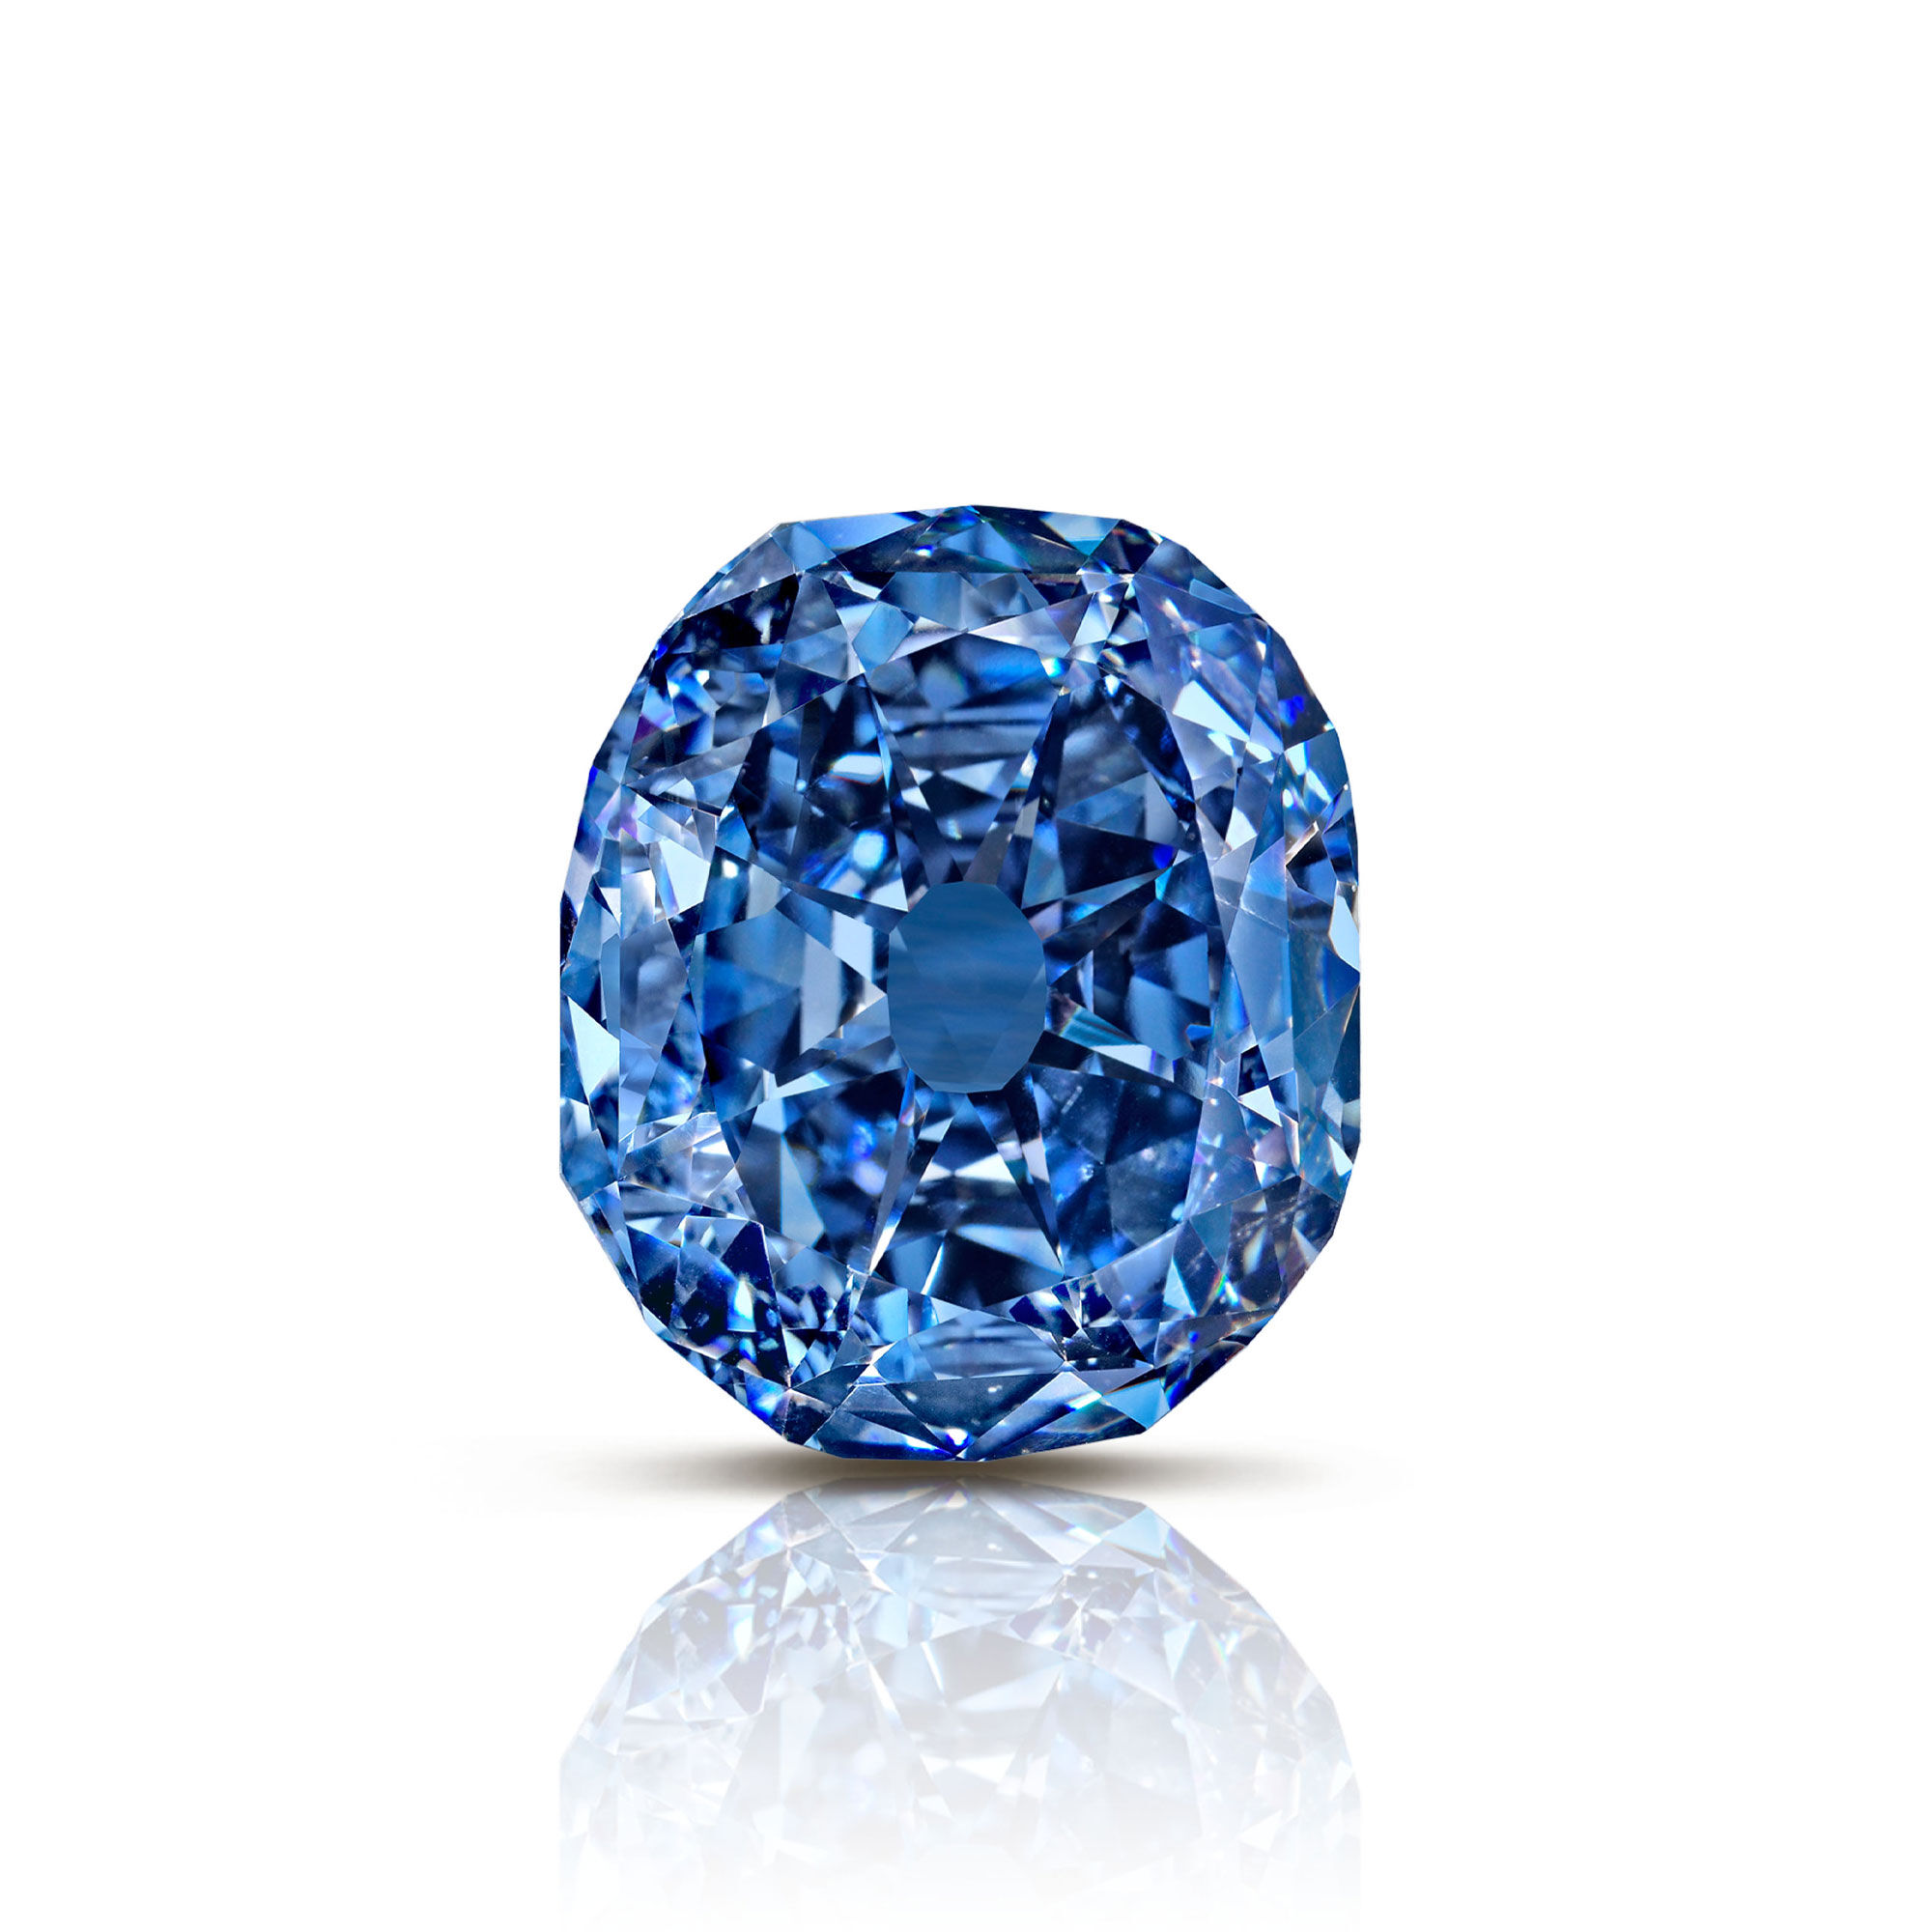 The Wittlesbach-Graff famous blue diamond